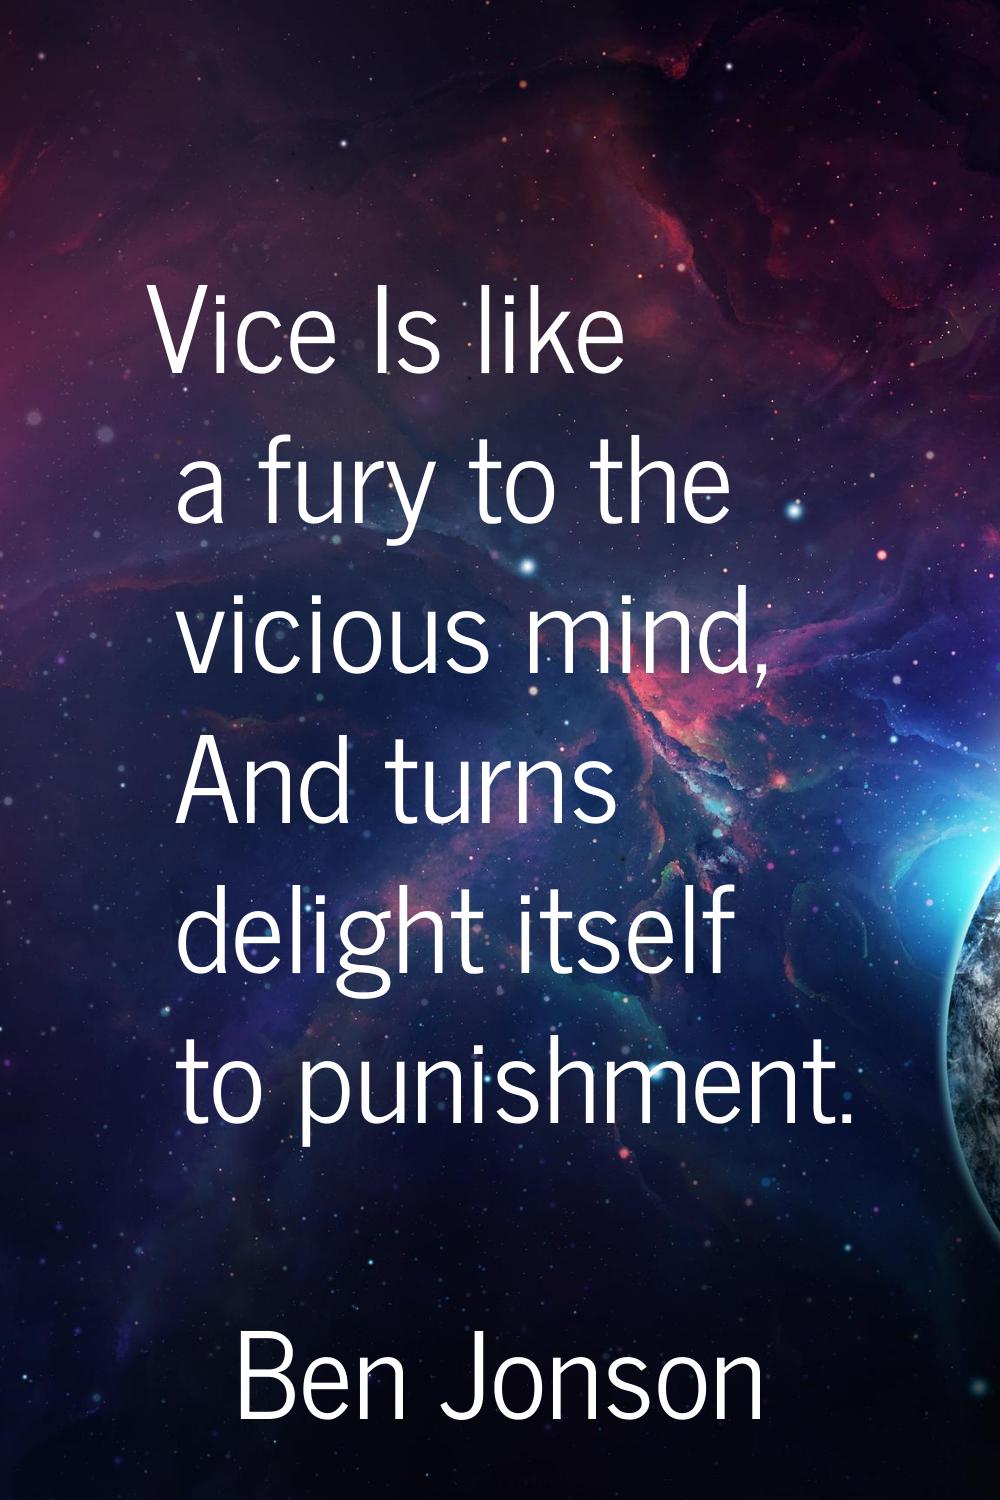 Vice Is like a fury to the vicious mind, And turns delight itself to punishment.